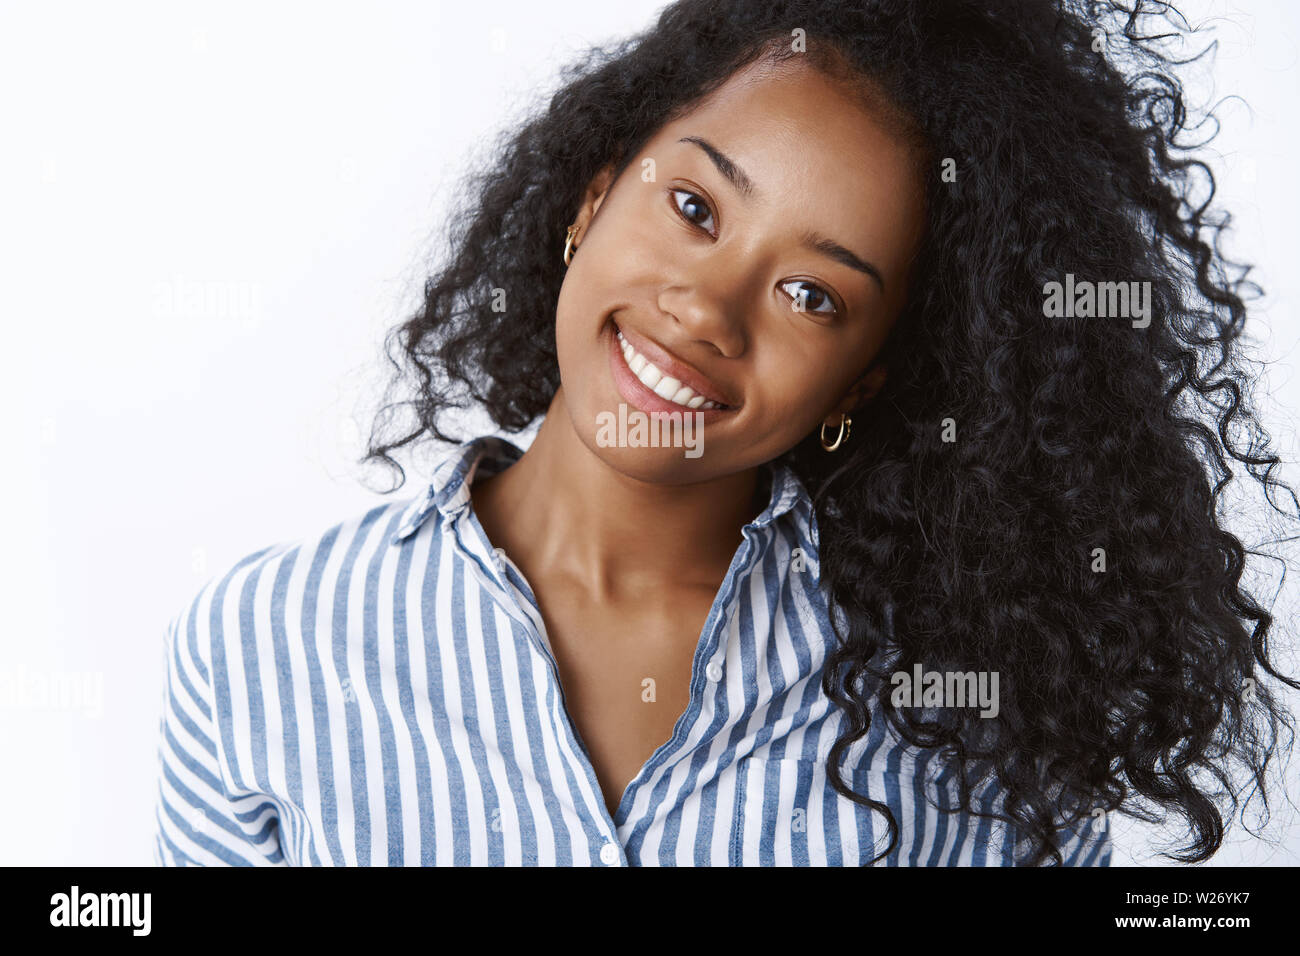 Comestology, skincare, lifestyle concept. Carefree young dark-skinned woman  tilt head joyfully smiling white teeth showing beautiful strong curly hair  Stock Photo - Alamy